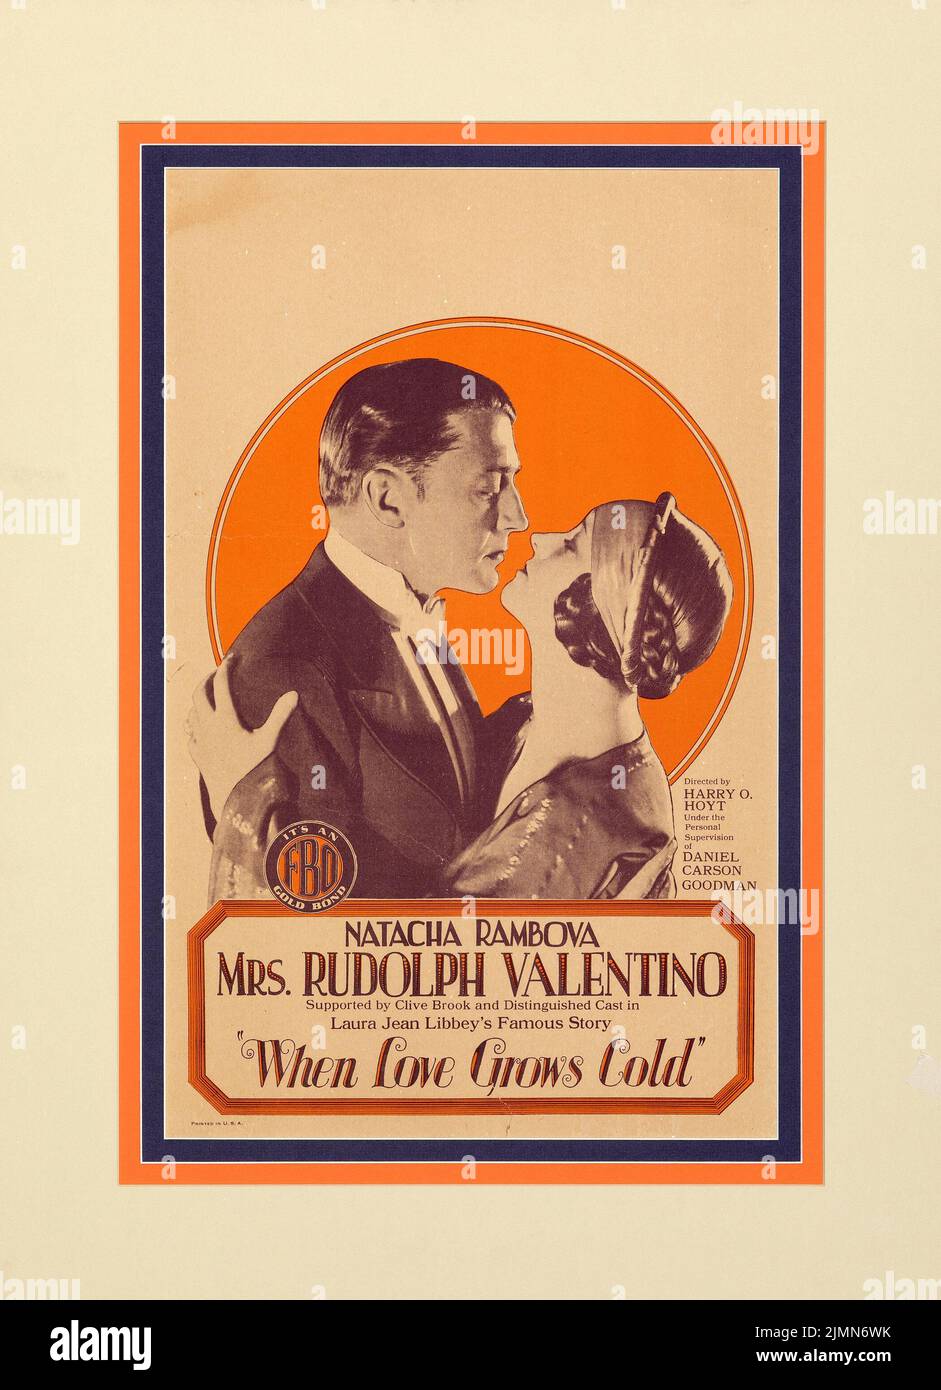 When Love Grows Cold (Film Booking Offices of America, 1926) Window Card - Rudolph Valentino Stock Photo